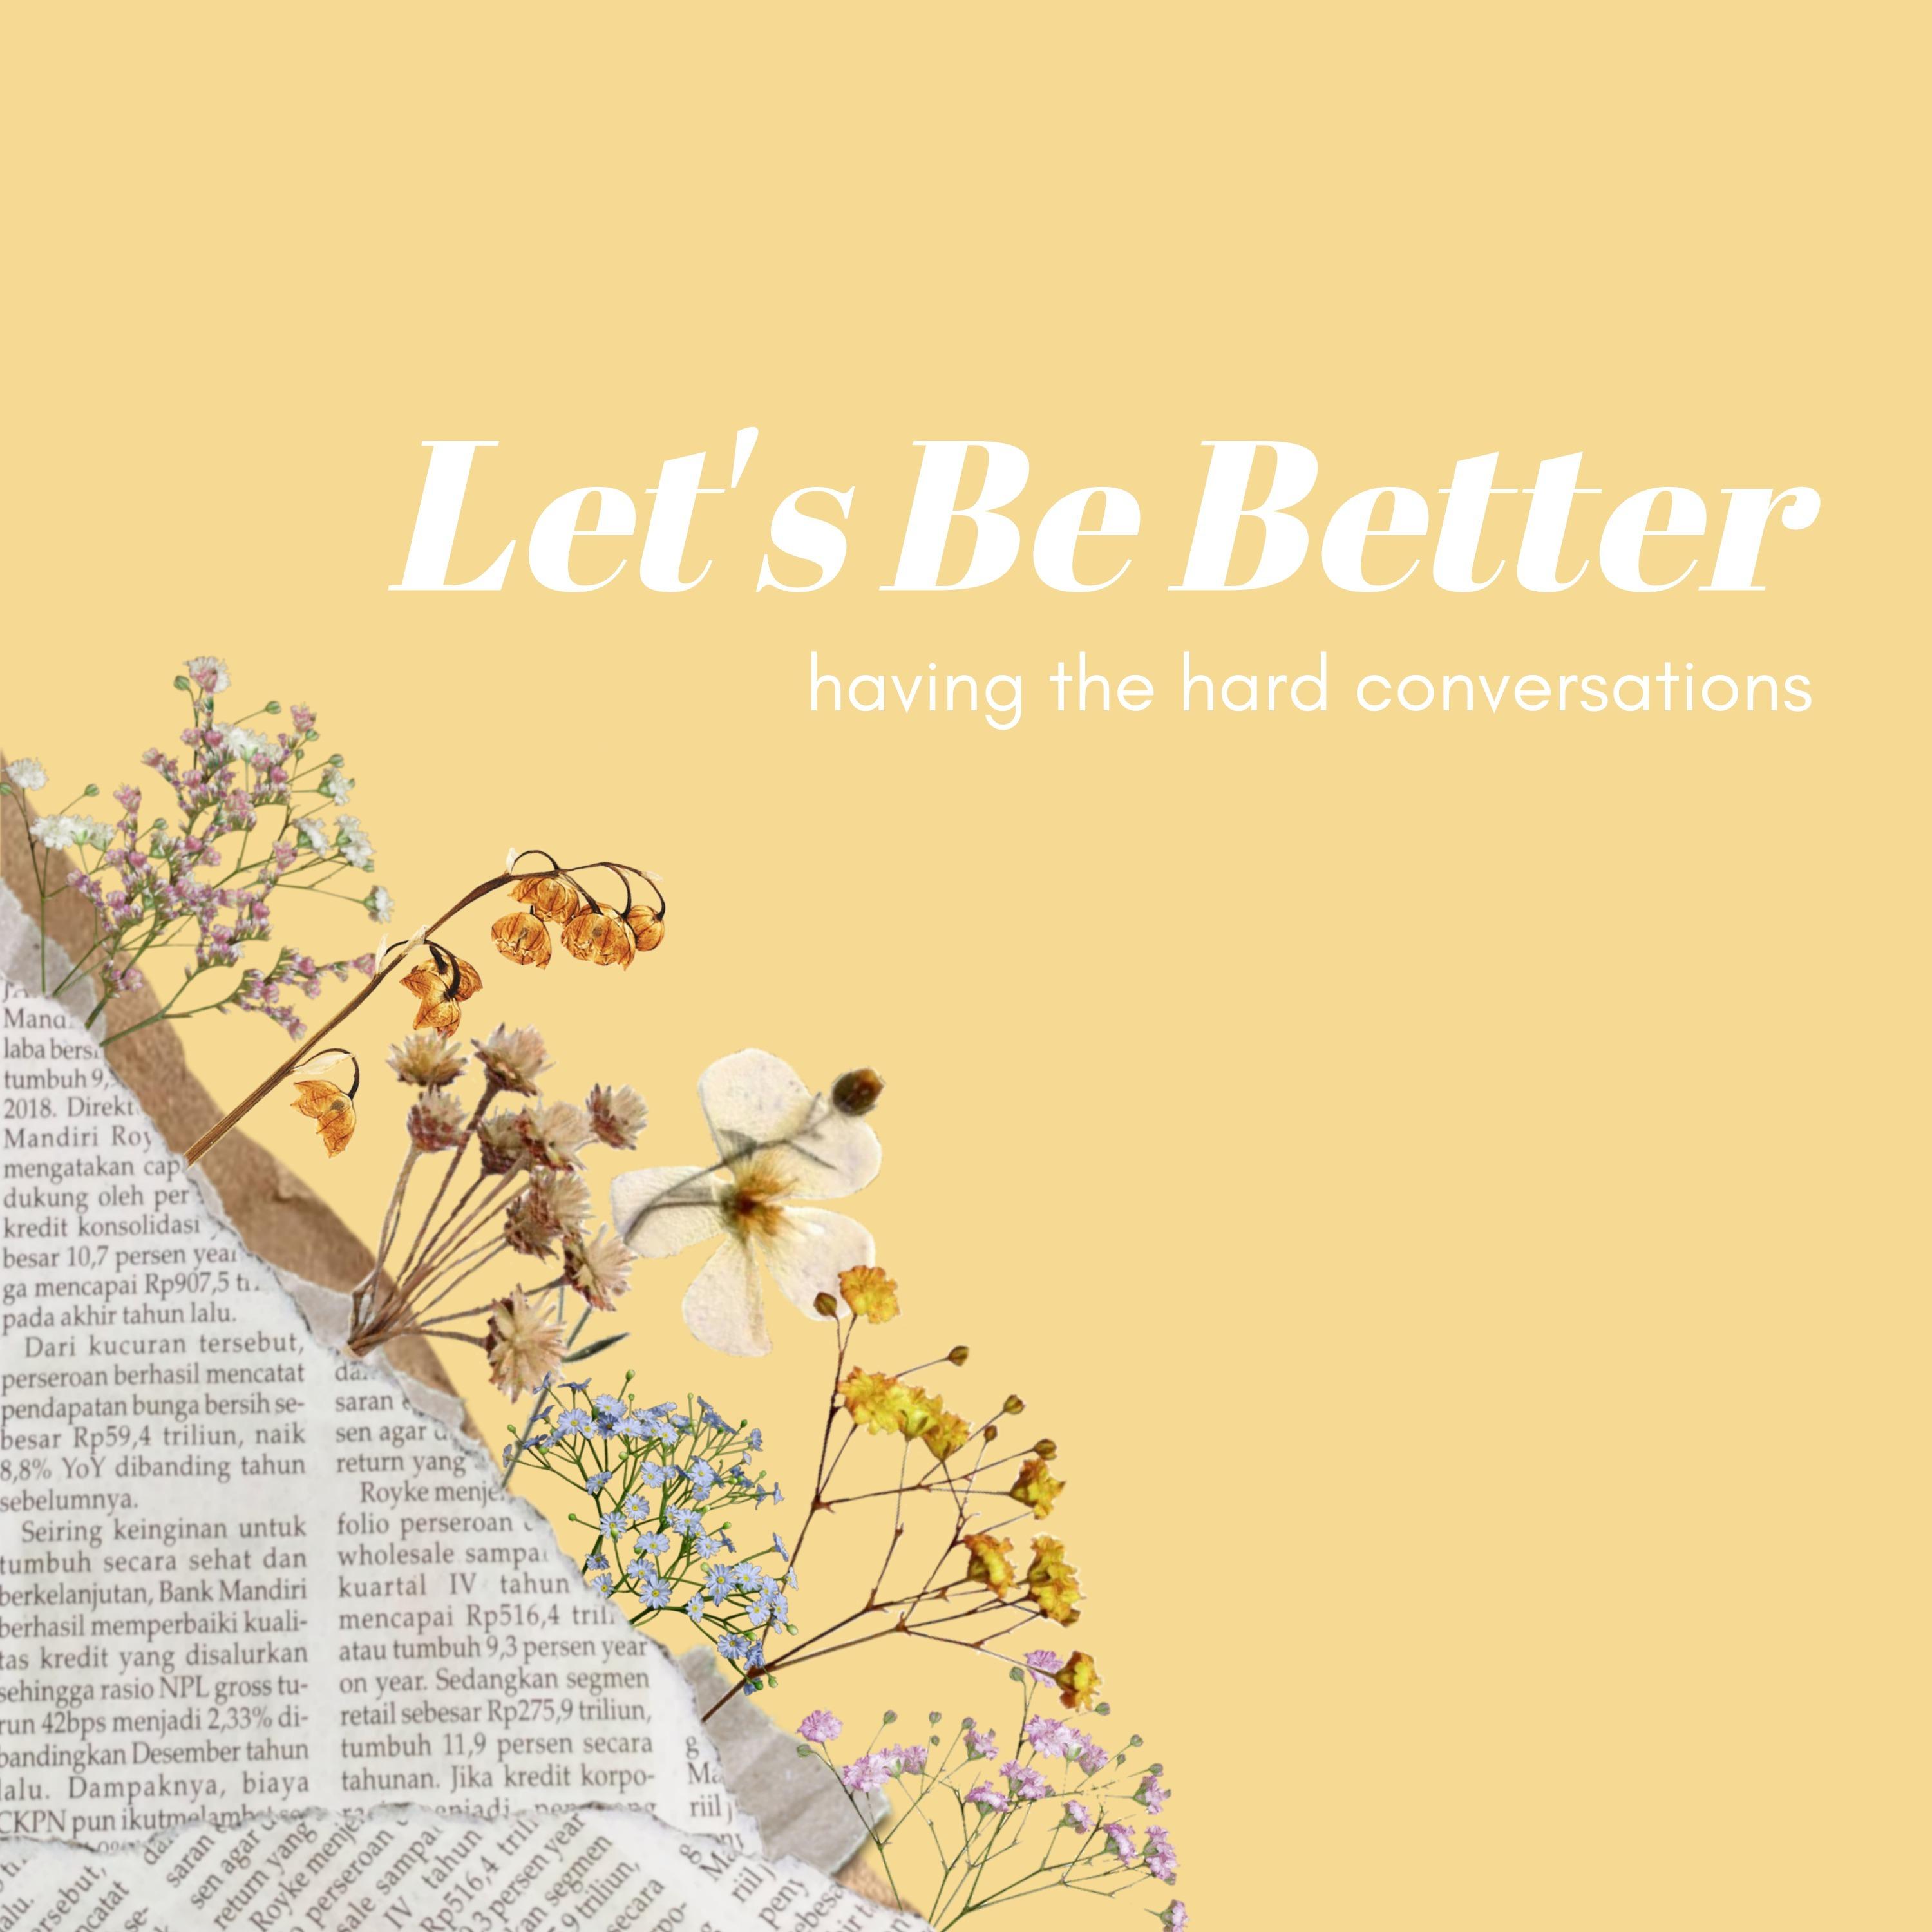 Let's Be Better